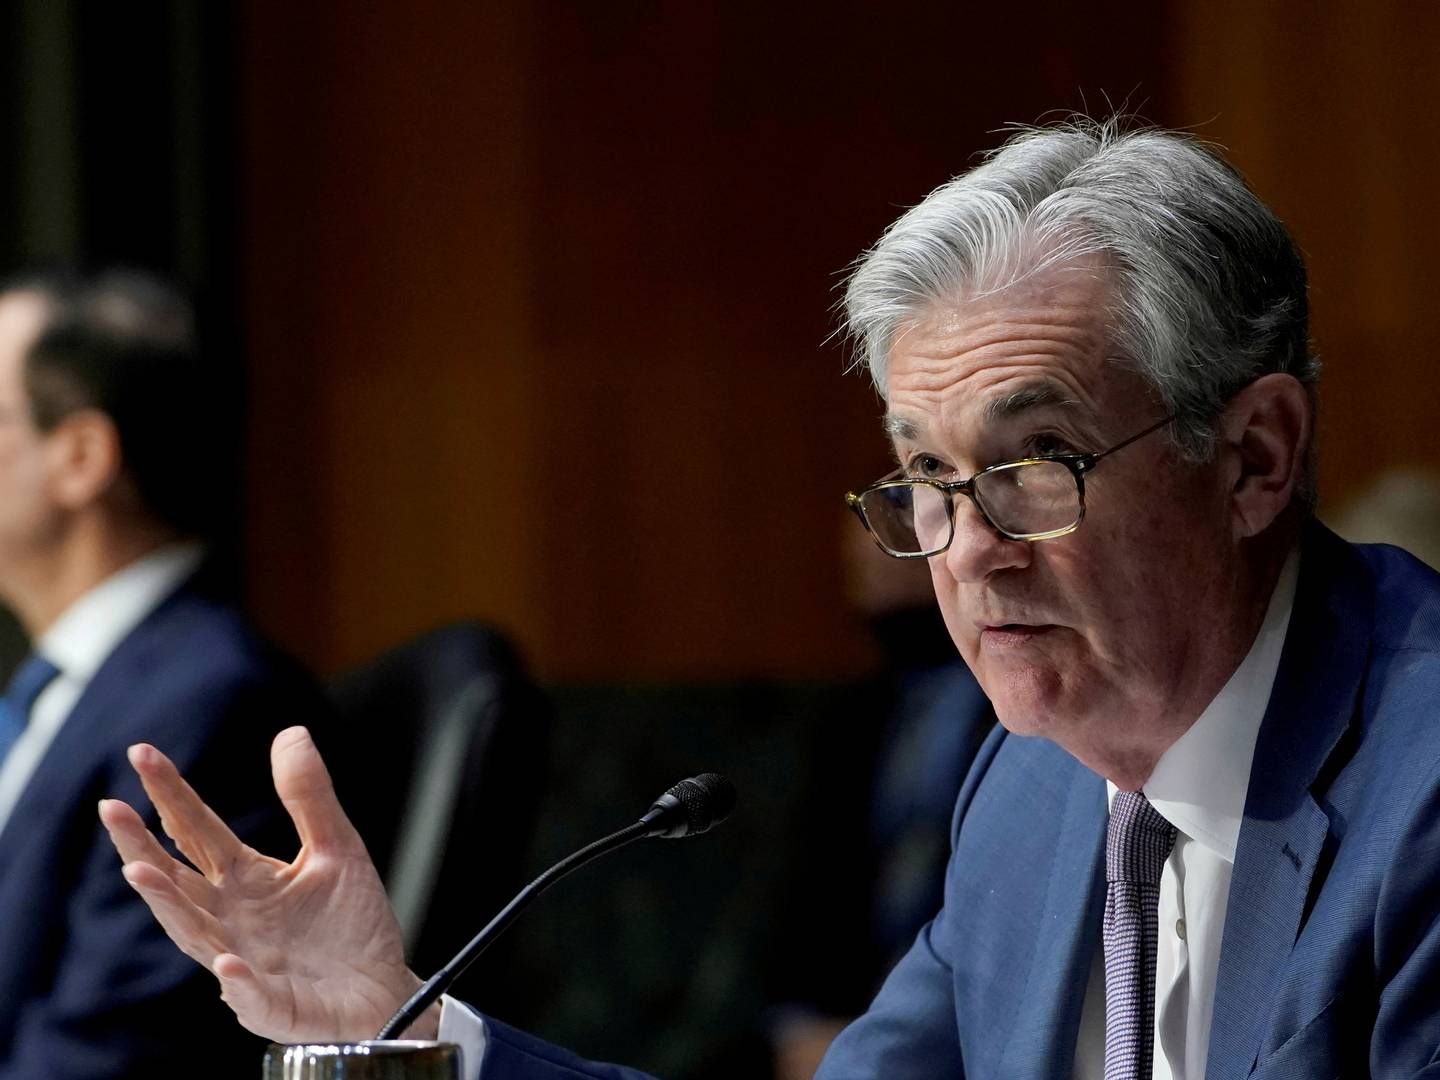 Formand for den amerikanske centralbank, Jerome Powell. | Foto: POOL New/REUTERS / X80003